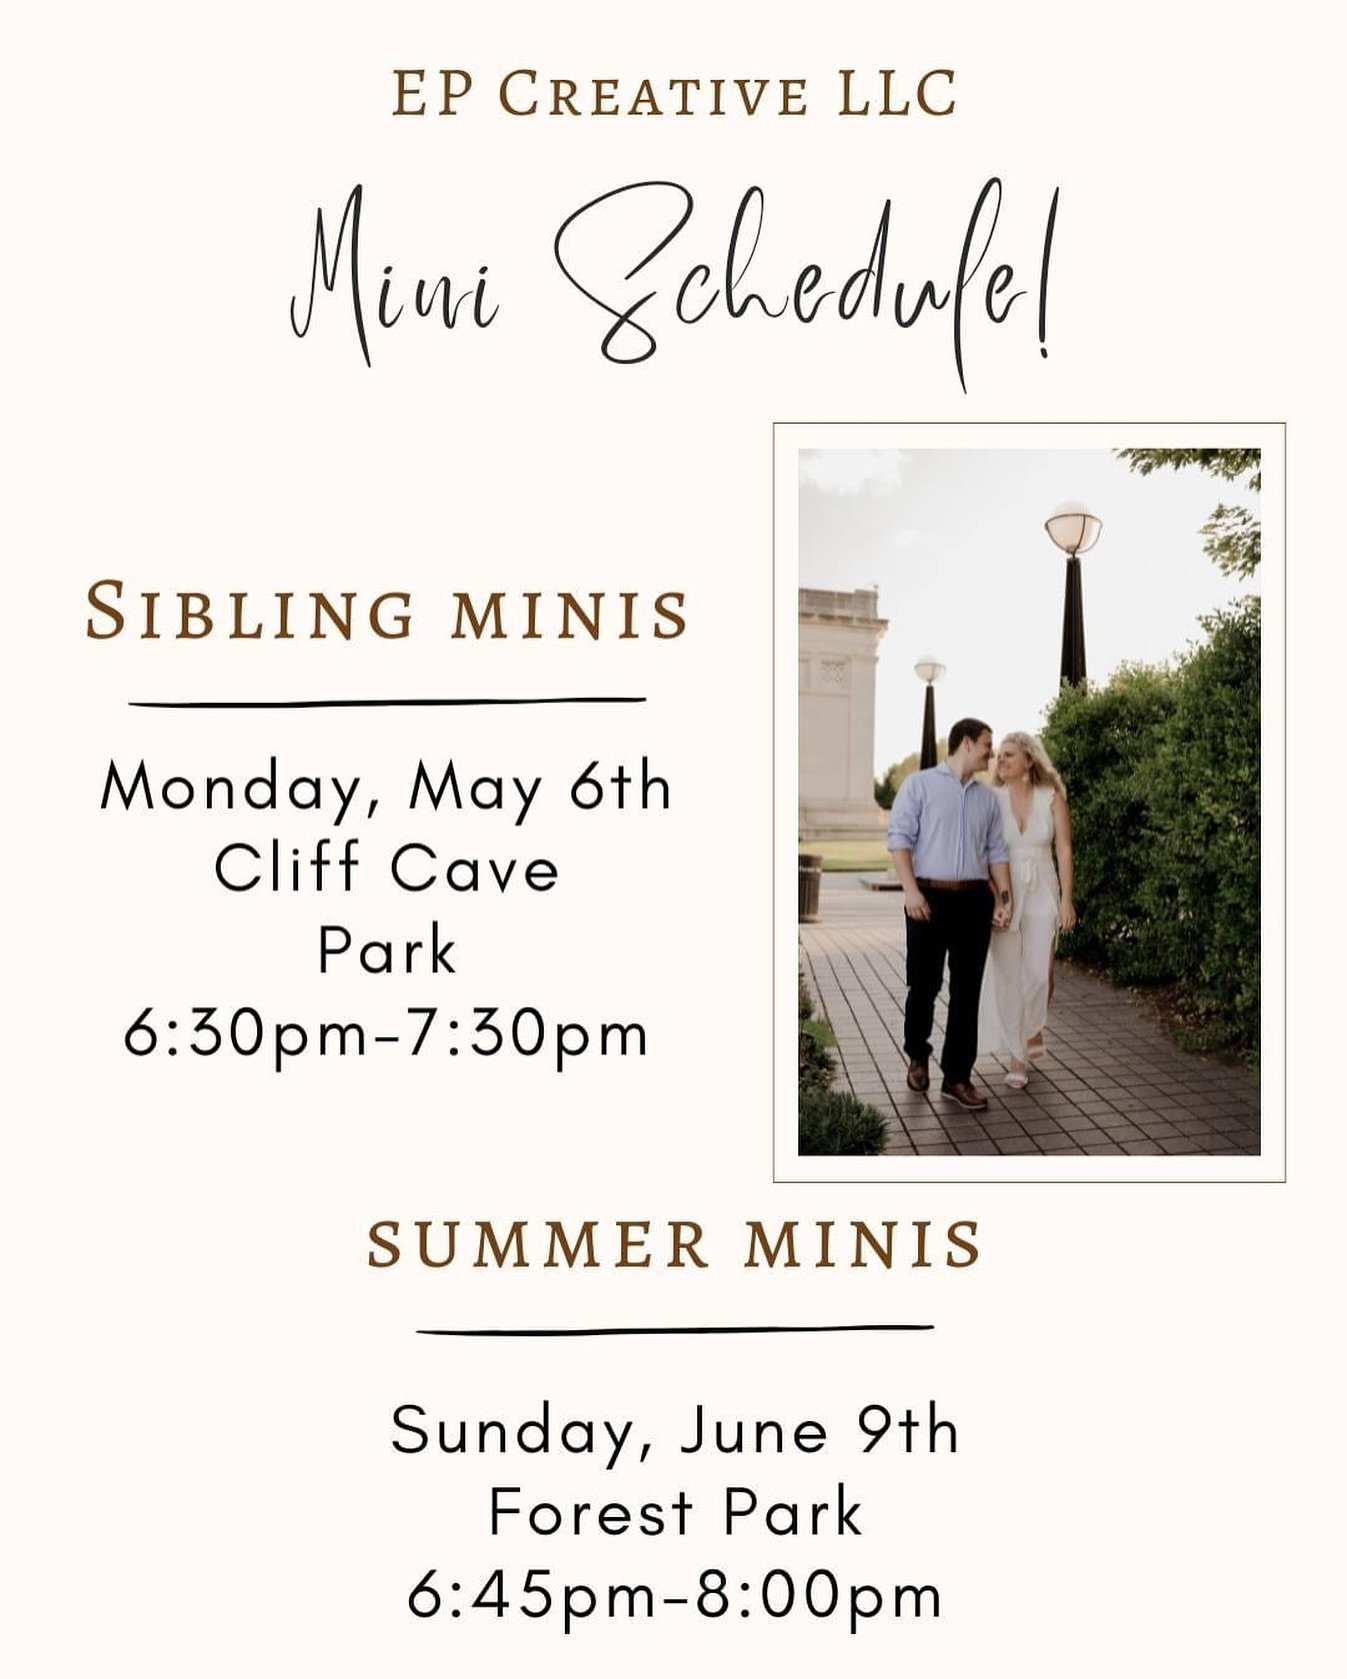 Surprise! I have created two dates for mini sessions coming up!
Sibling Minis: Monday, May 6th - Cliff Cave
*Guaranteed delivery for Mother&rsquo;s Day!*

Summer Minis: Sunday, June 9th - Forest Park

Links to book are in my bio!